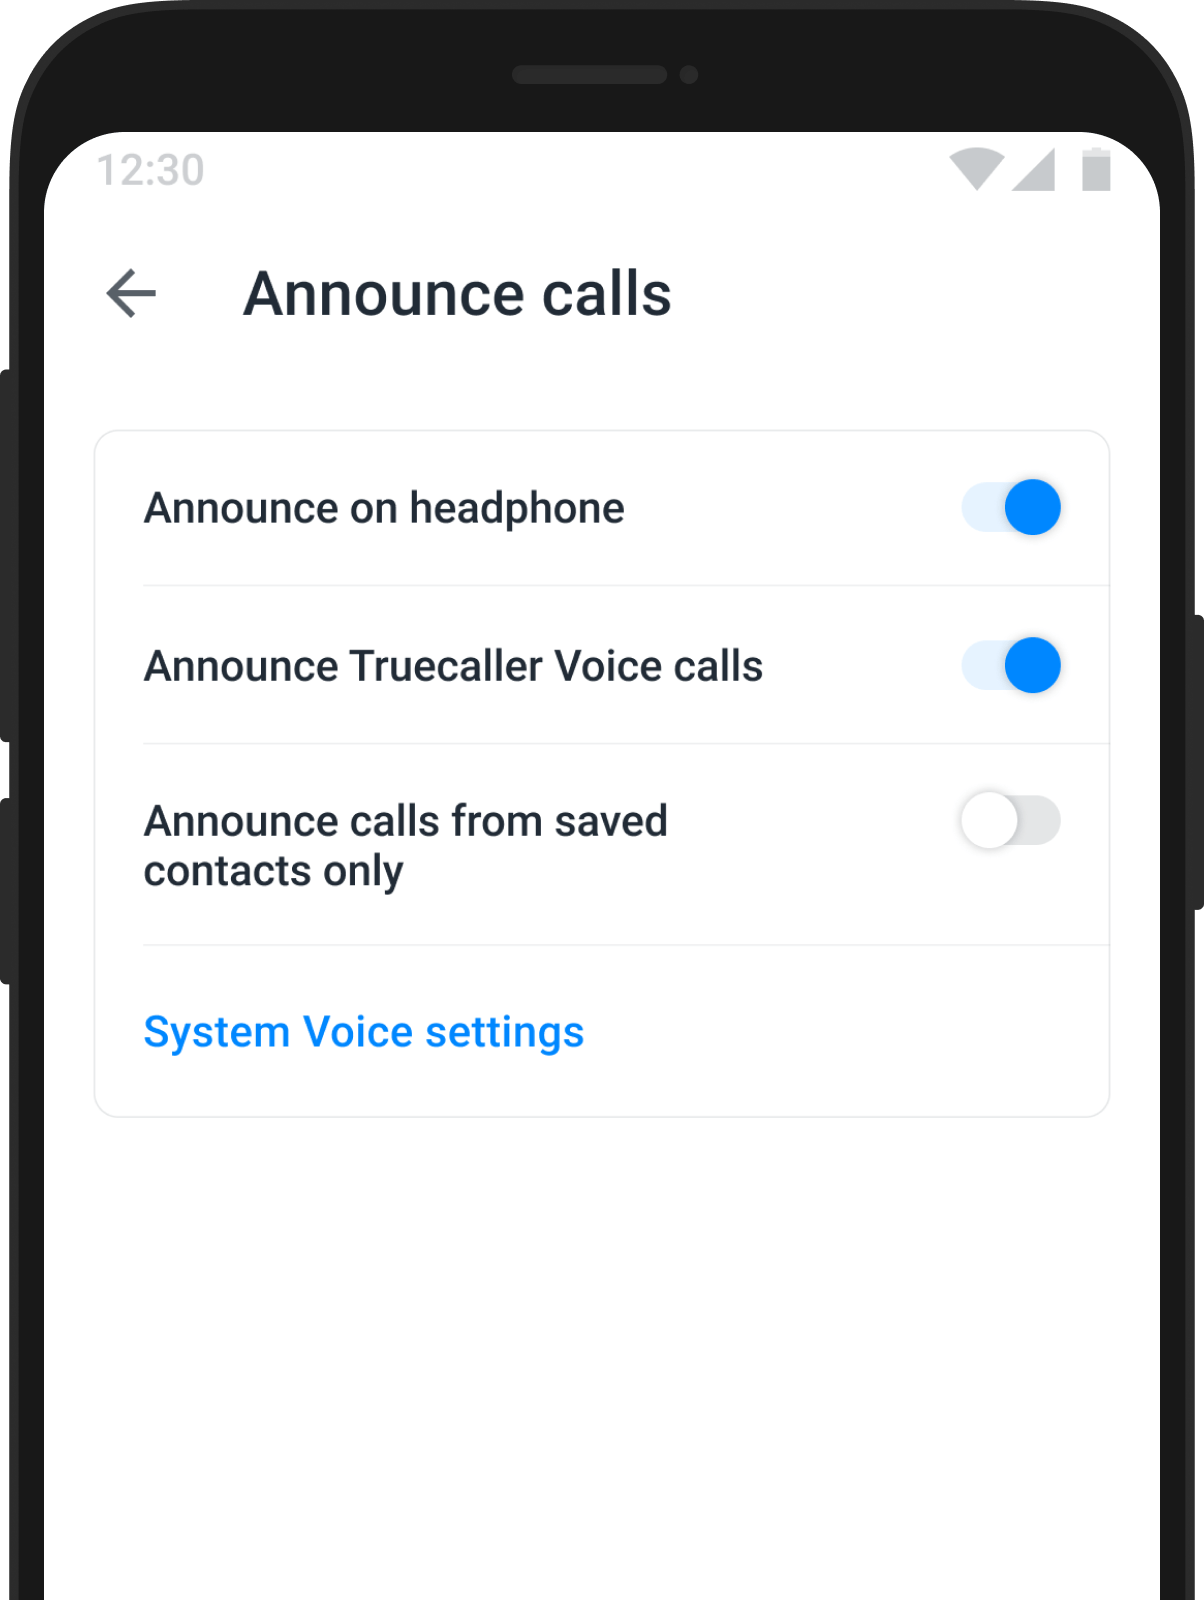 How to Setup Announce Call in Truecaller